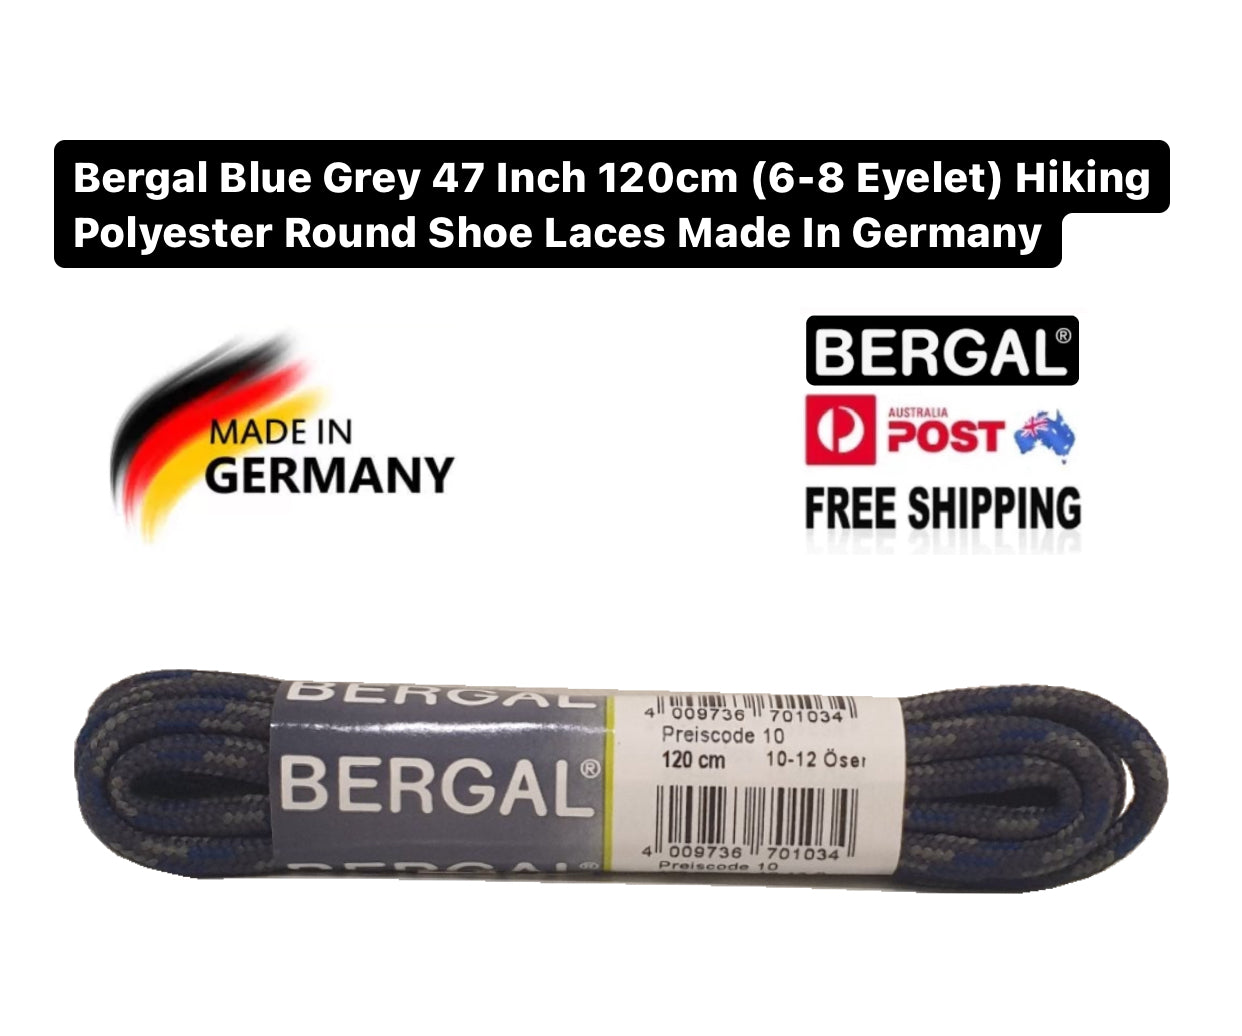 Bergal Blue Grey 47 Inch 120cm (6-8 Eyelet) Hiking Polyester Round Shoe Laces Made In Germany